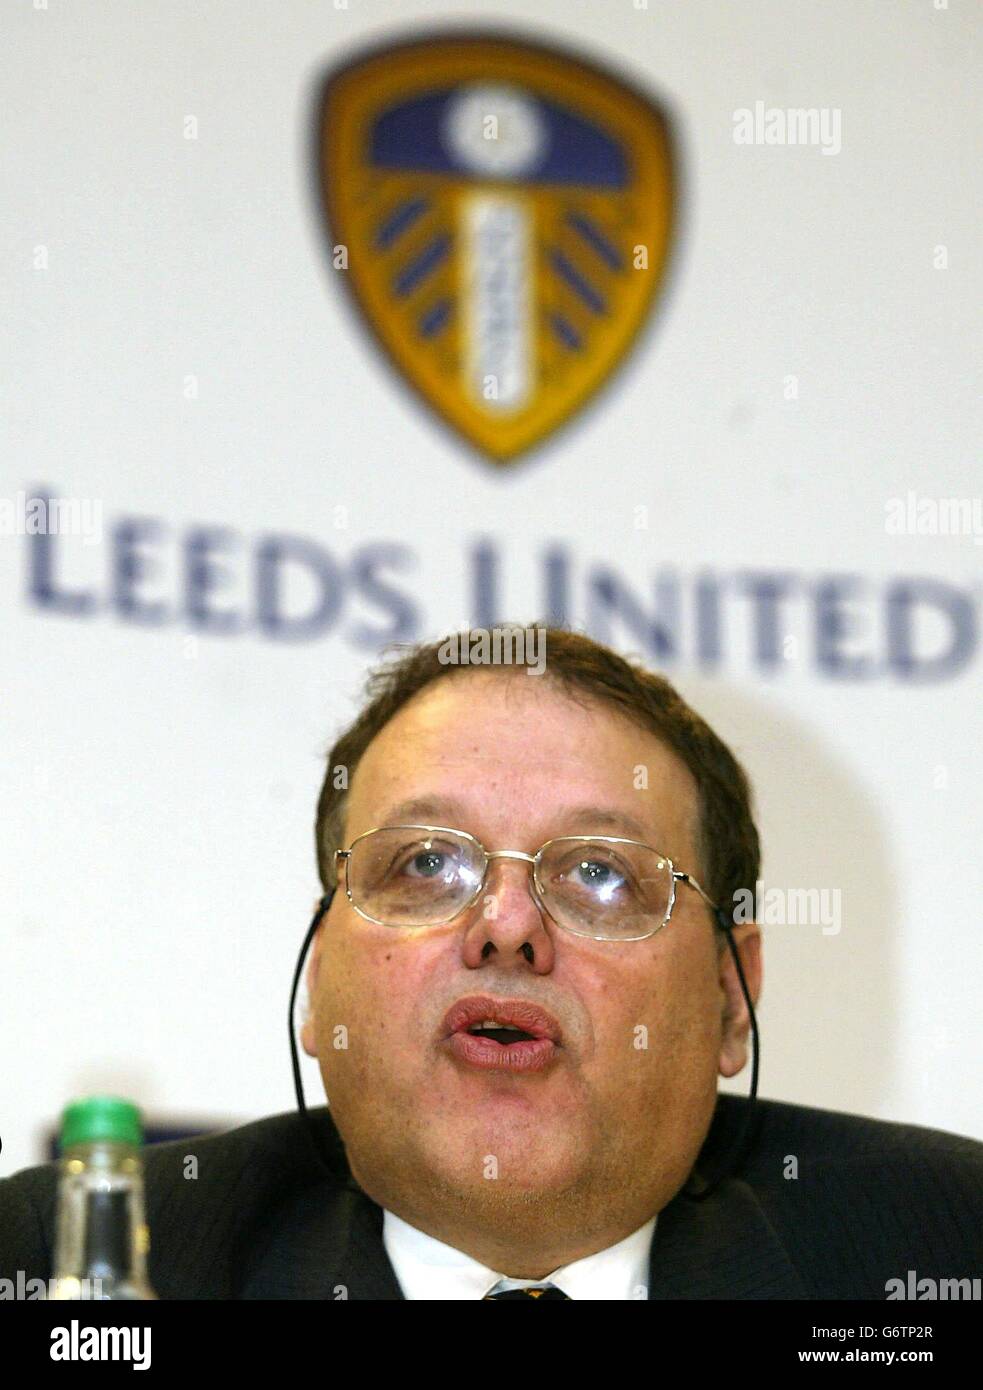 New Leeds chairman Gerald Krasner speaking during a press conference at Elland Road stadium, Leeds. Krasner claimed that had his consortium not taken over the club on Friday it would not have survived. 'The total debt was just over the 100 million mark and this club was totally insolvent,' revealed Krasner. Stock Photo